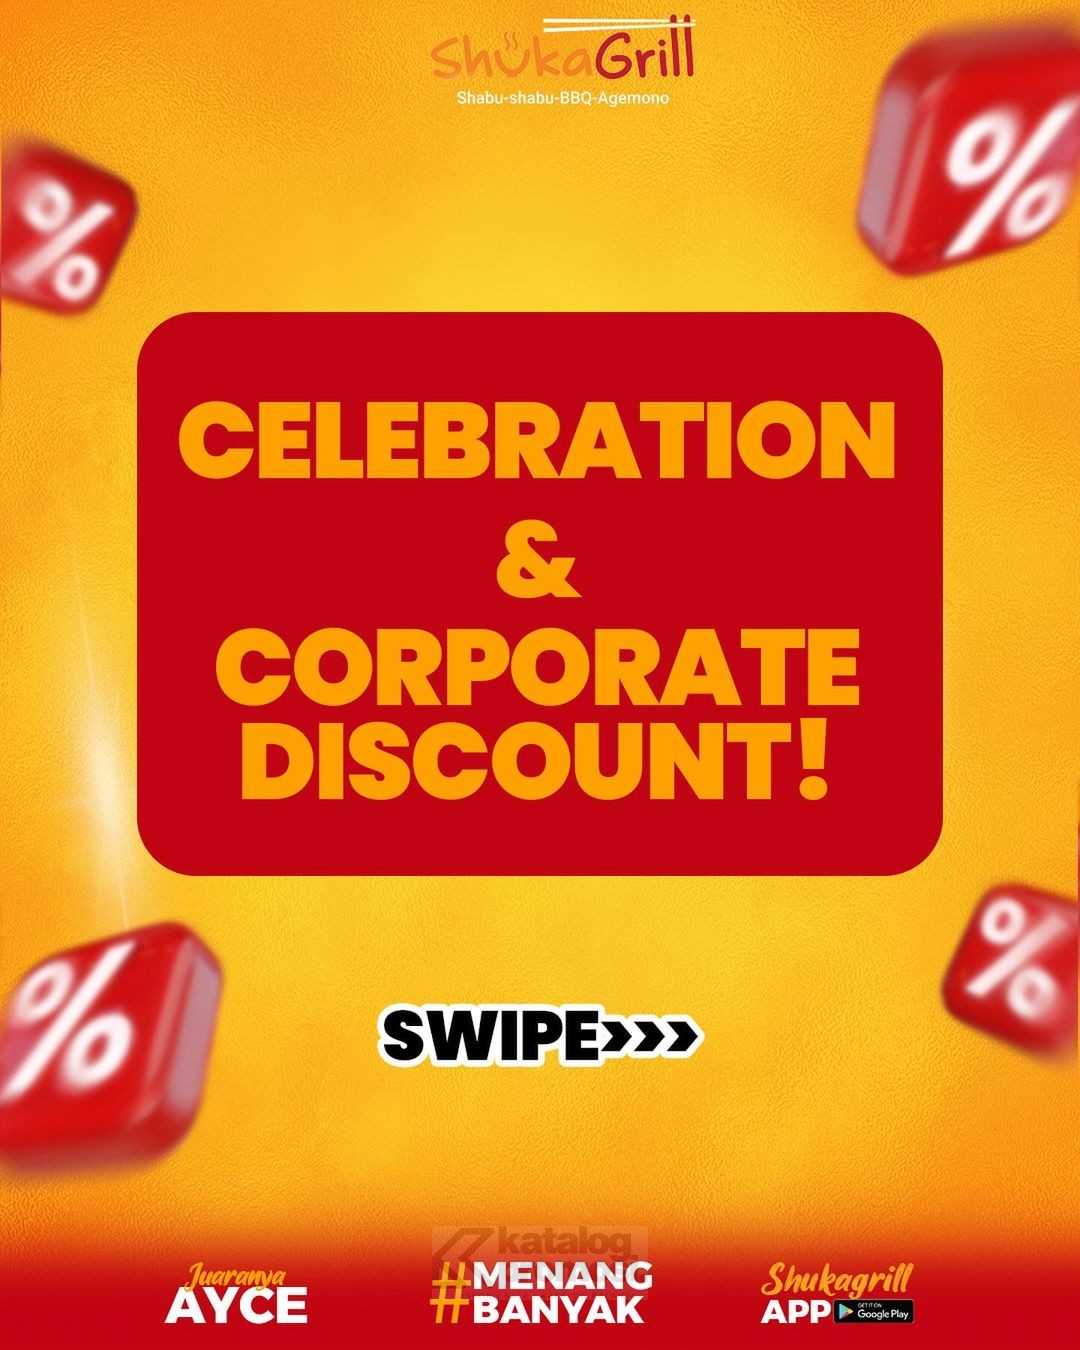 Promo SHUKAGRILL Celebration day & Corporate Discount up to 15%